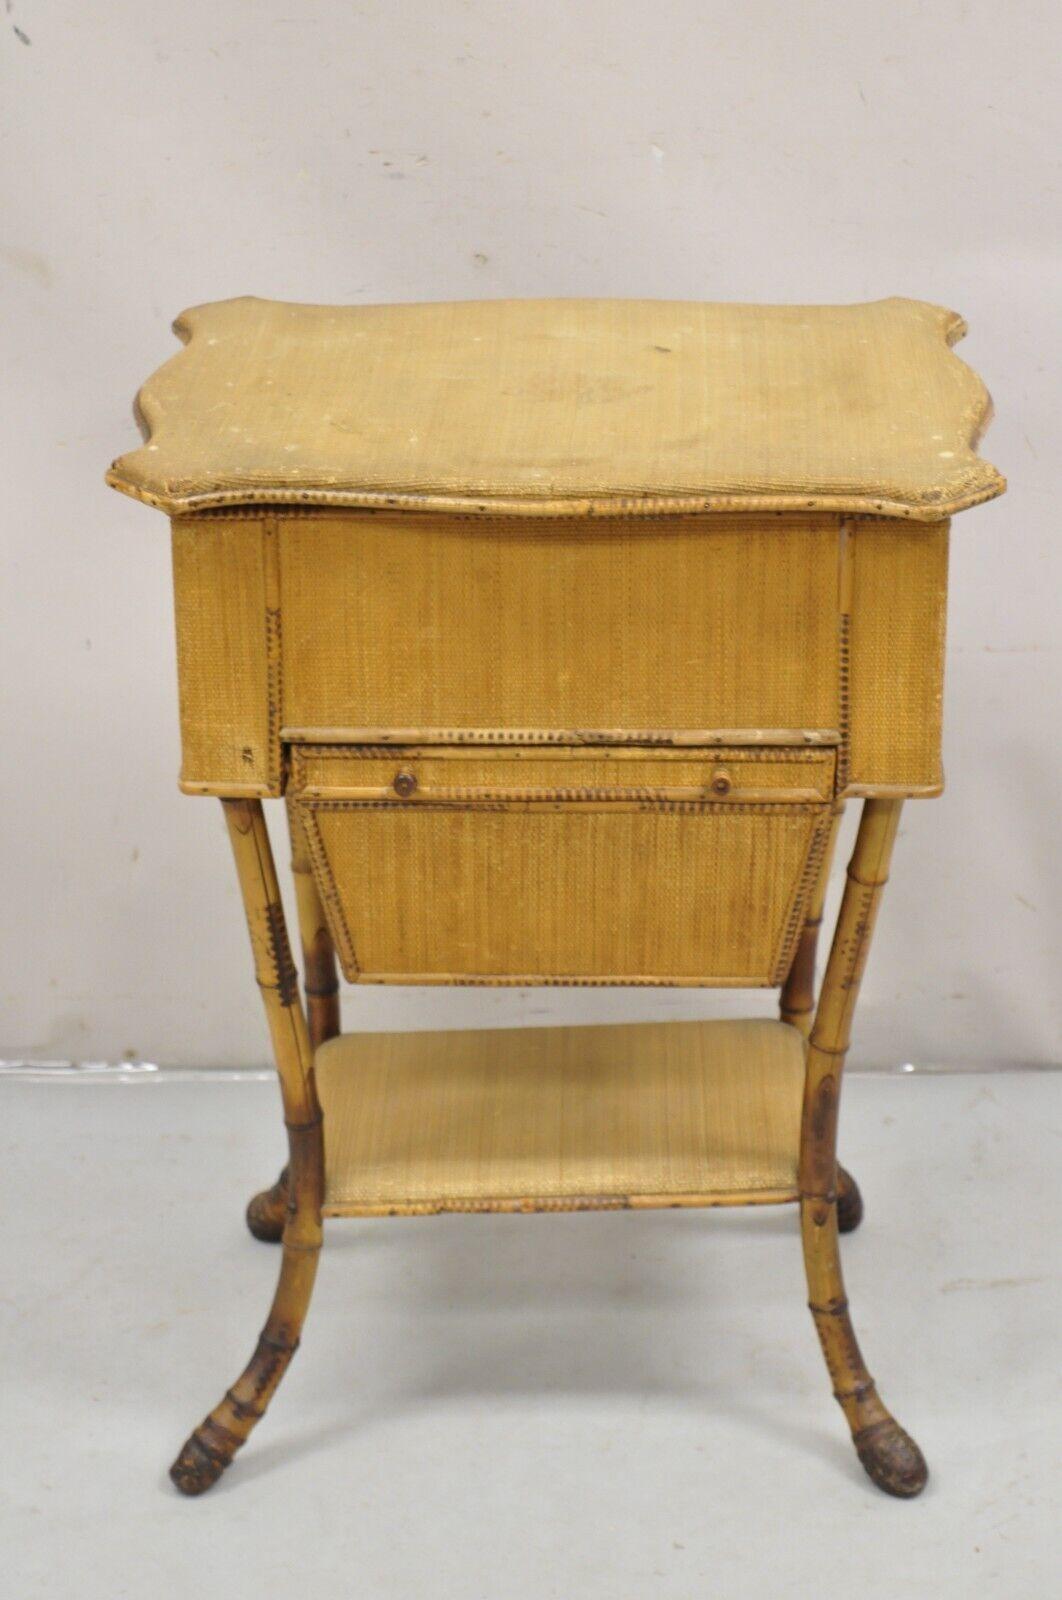 Antique English Victorian Bamboo Rattan Sewing Box Work Stand Side Table In Good Condition For Sale In Philadelphia, PA